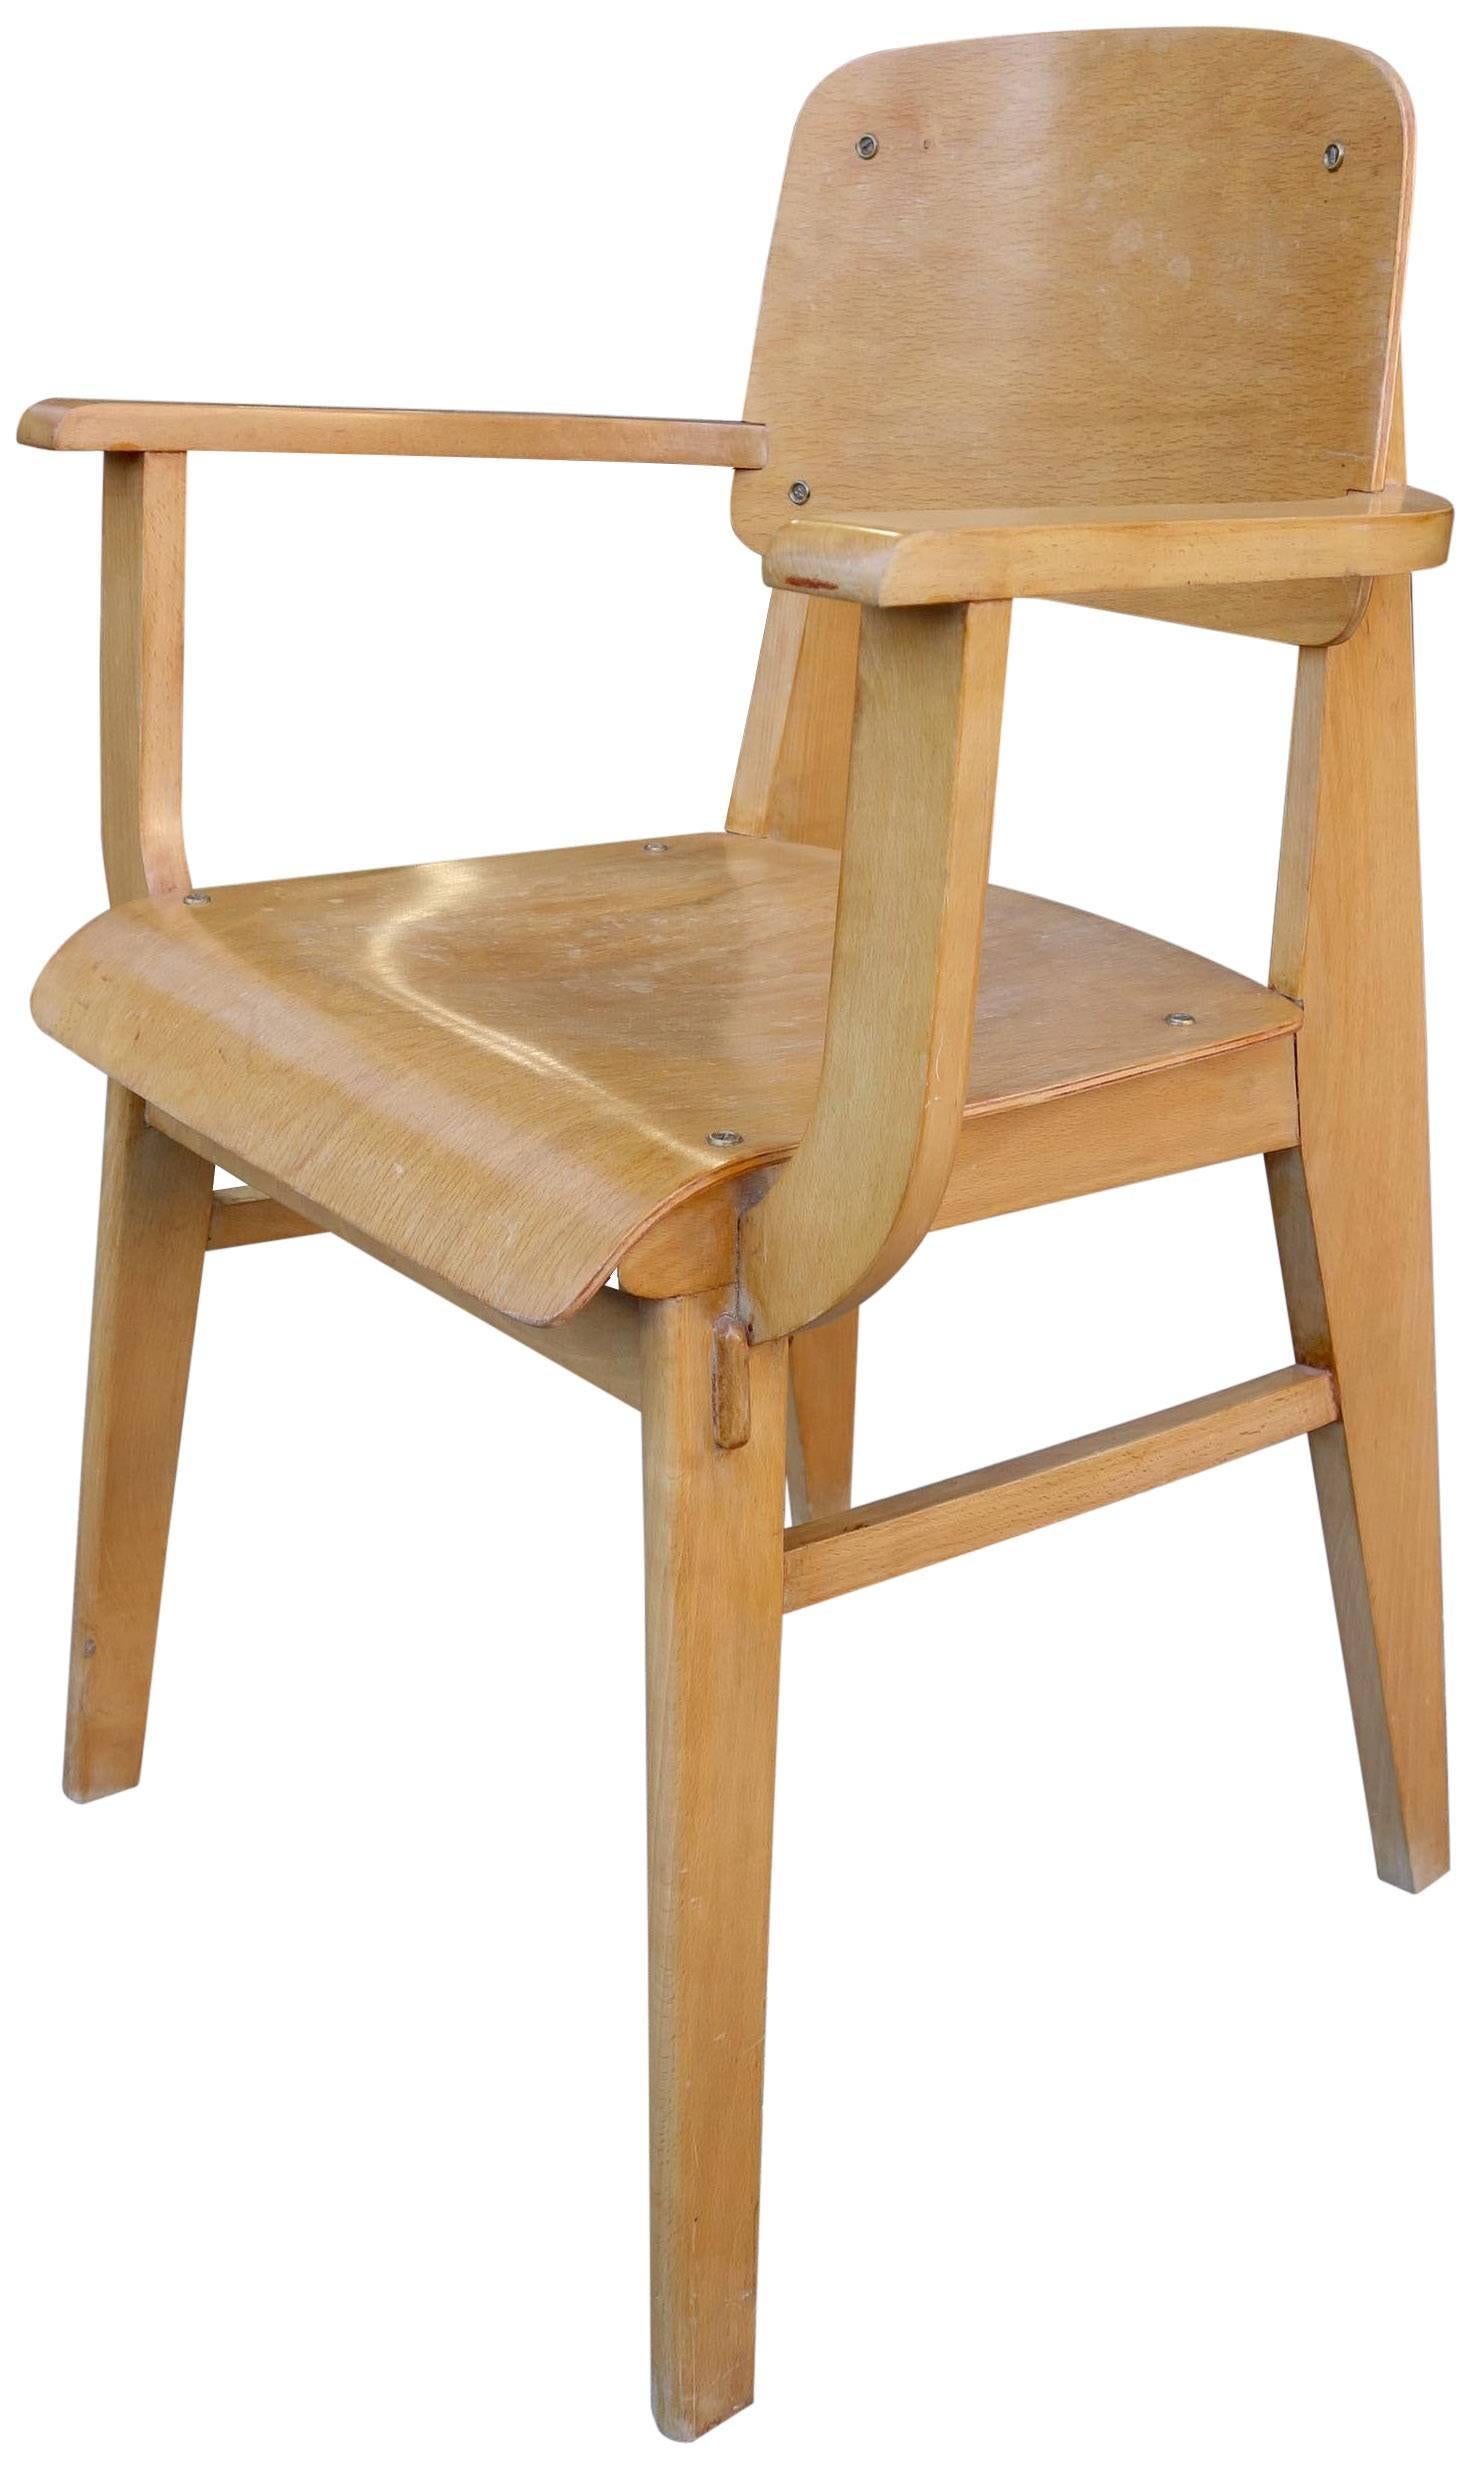 Jean Prouve standard chair in all wood for Ateliers Jean Prouvè 1941. A rare collectors piece. 